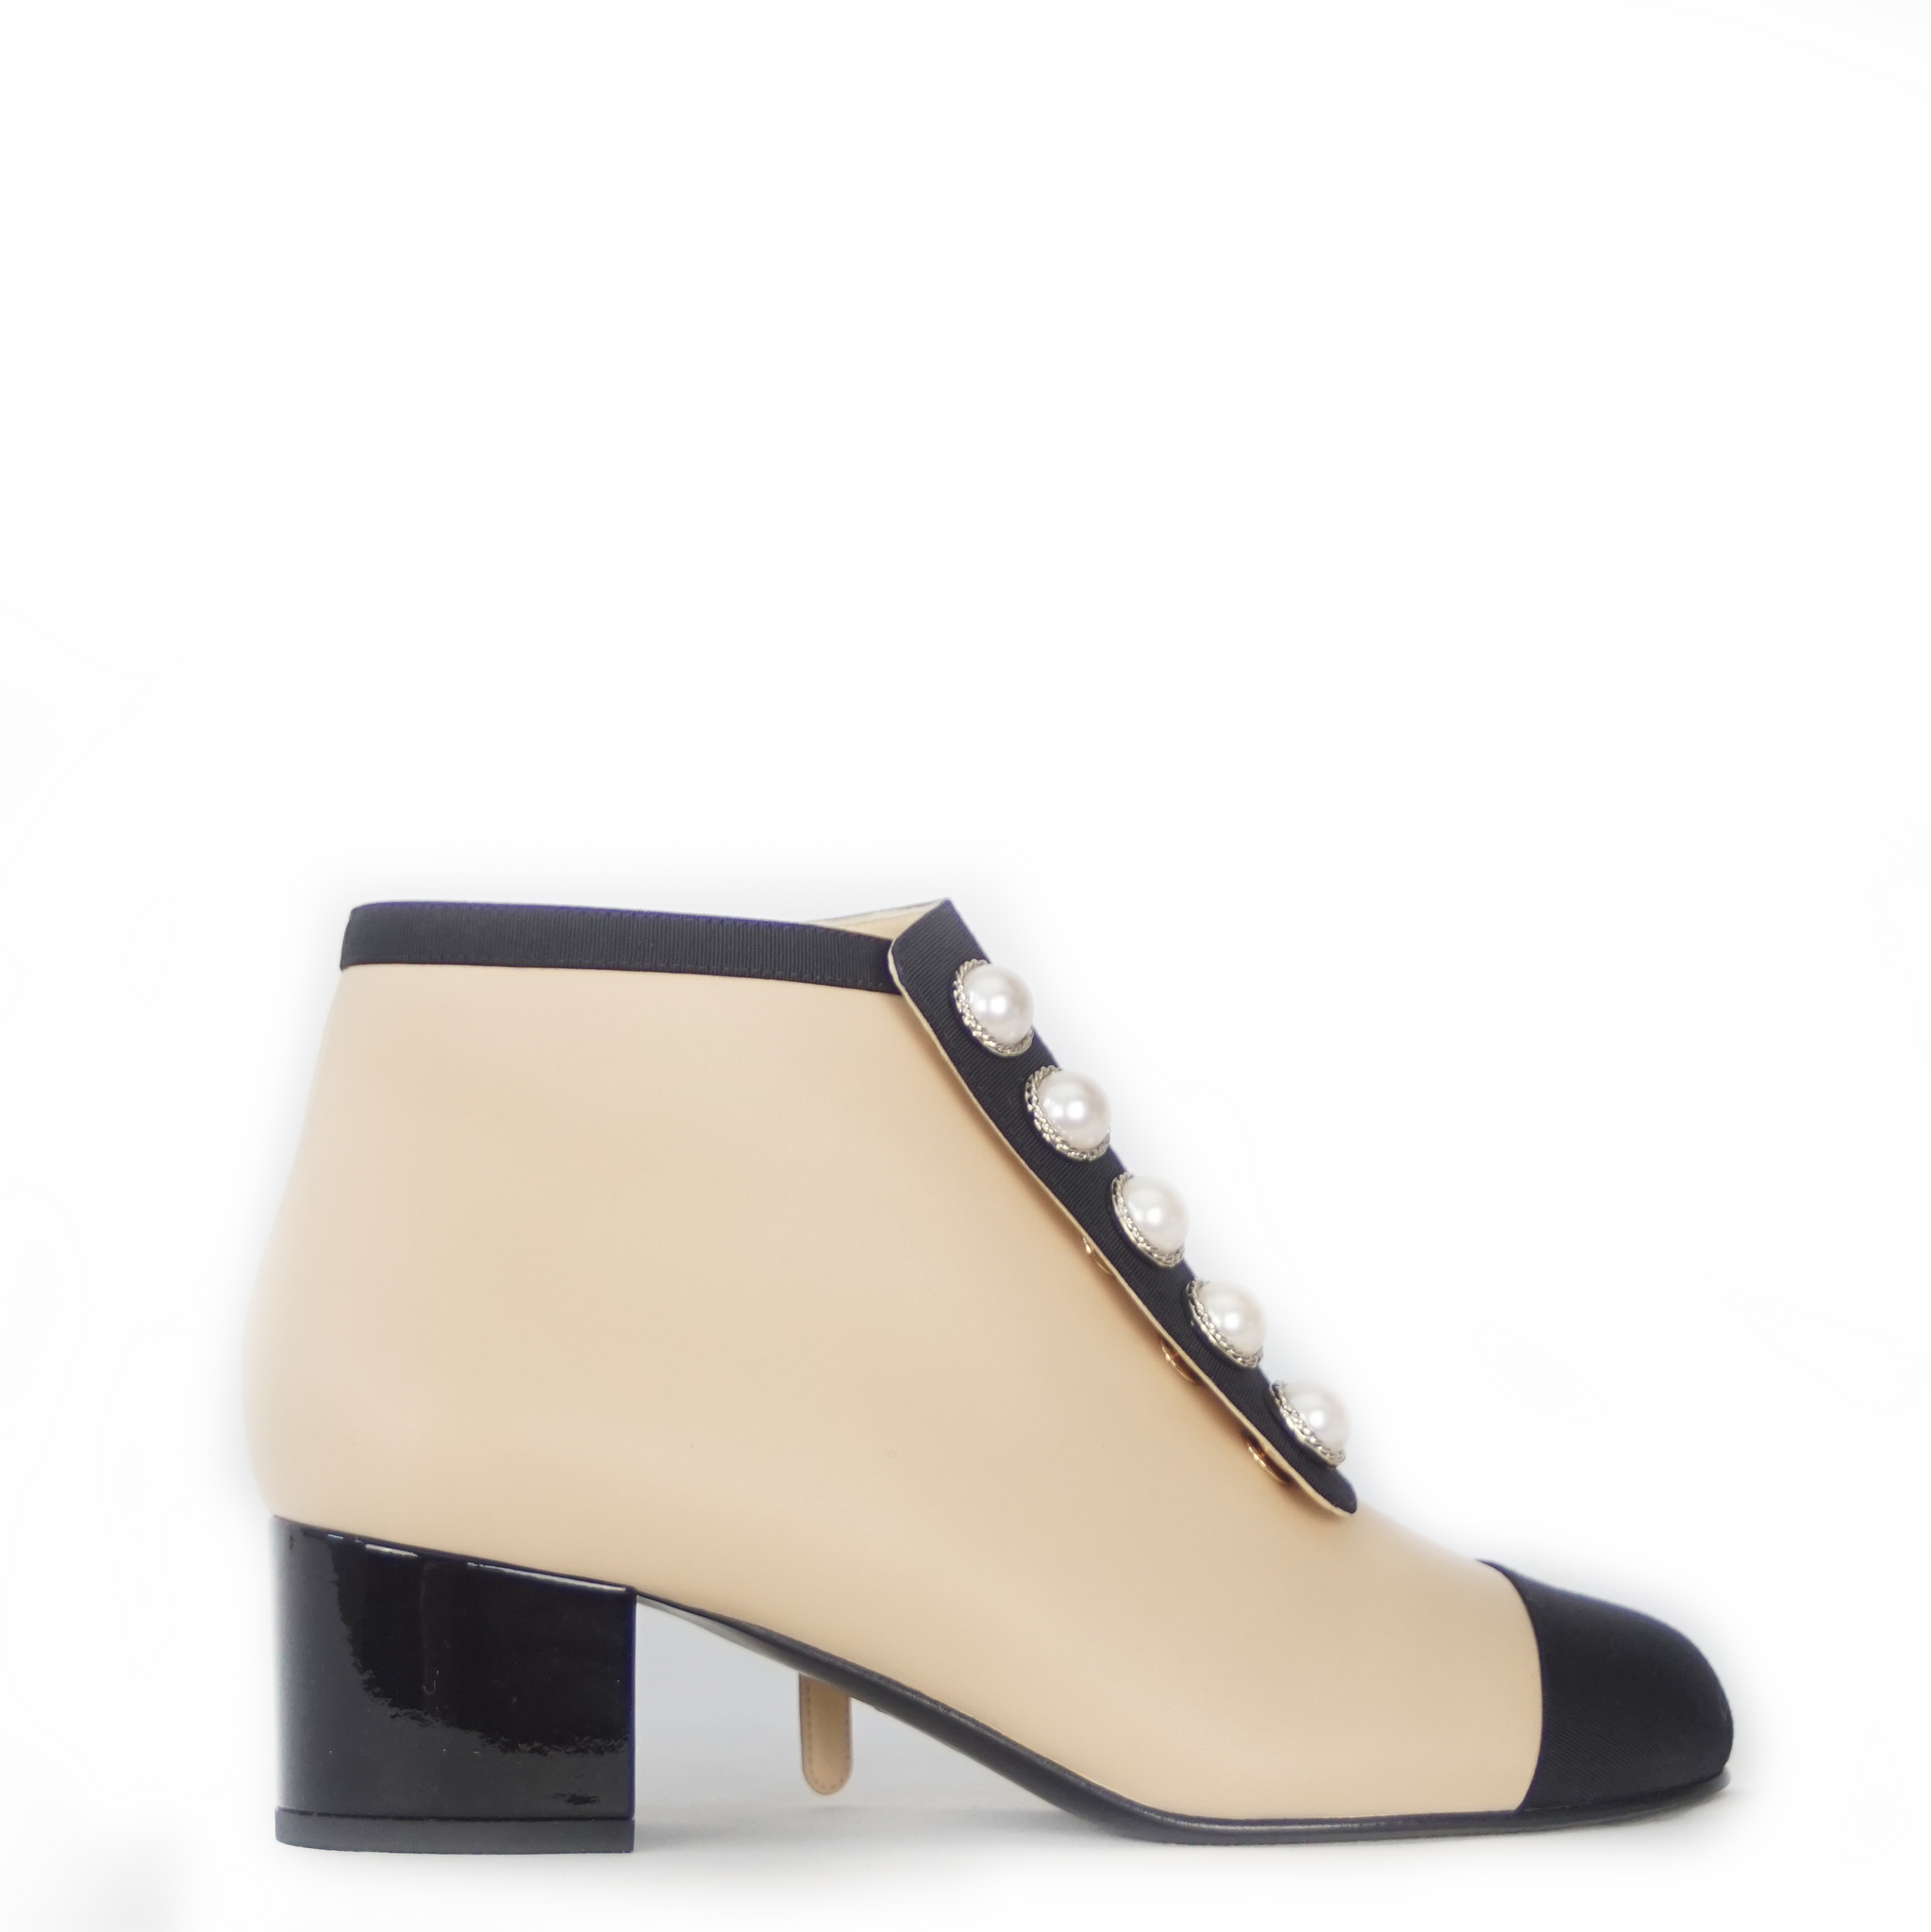 CHANEL Leather Ankle Boots Pearl Accent US 7.5 CHANEL Shoes